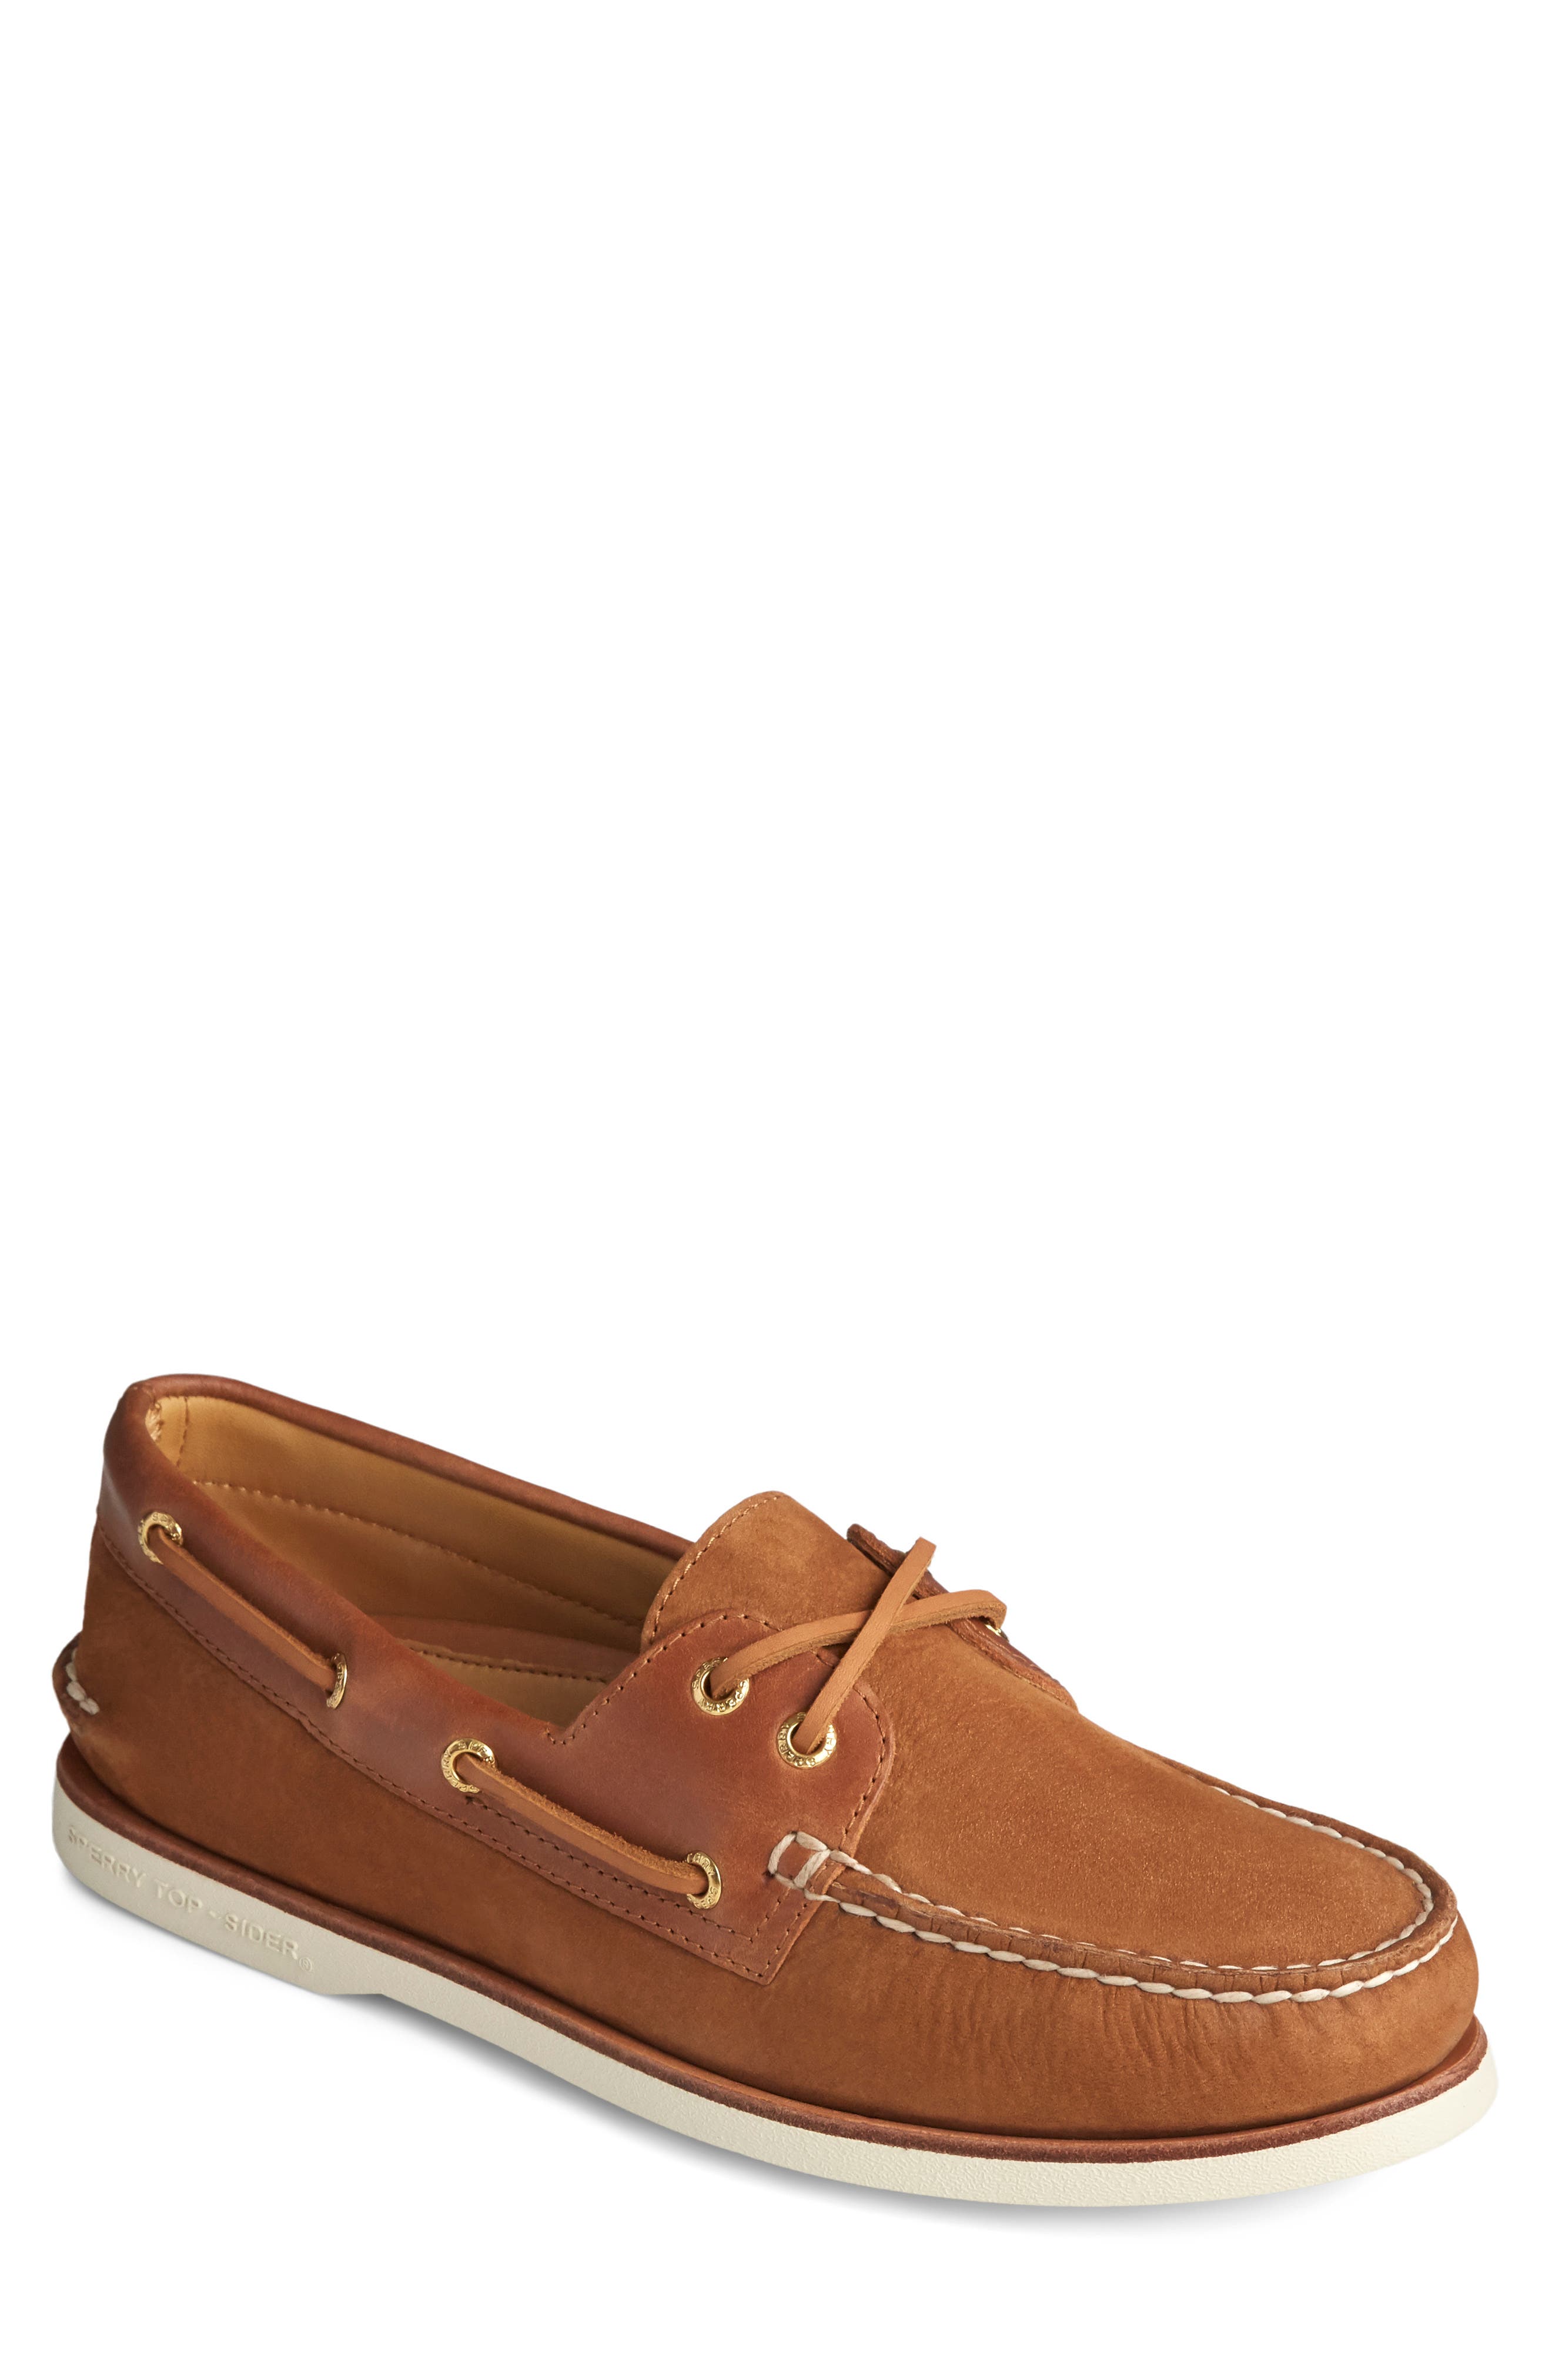 sperry gold cup sale